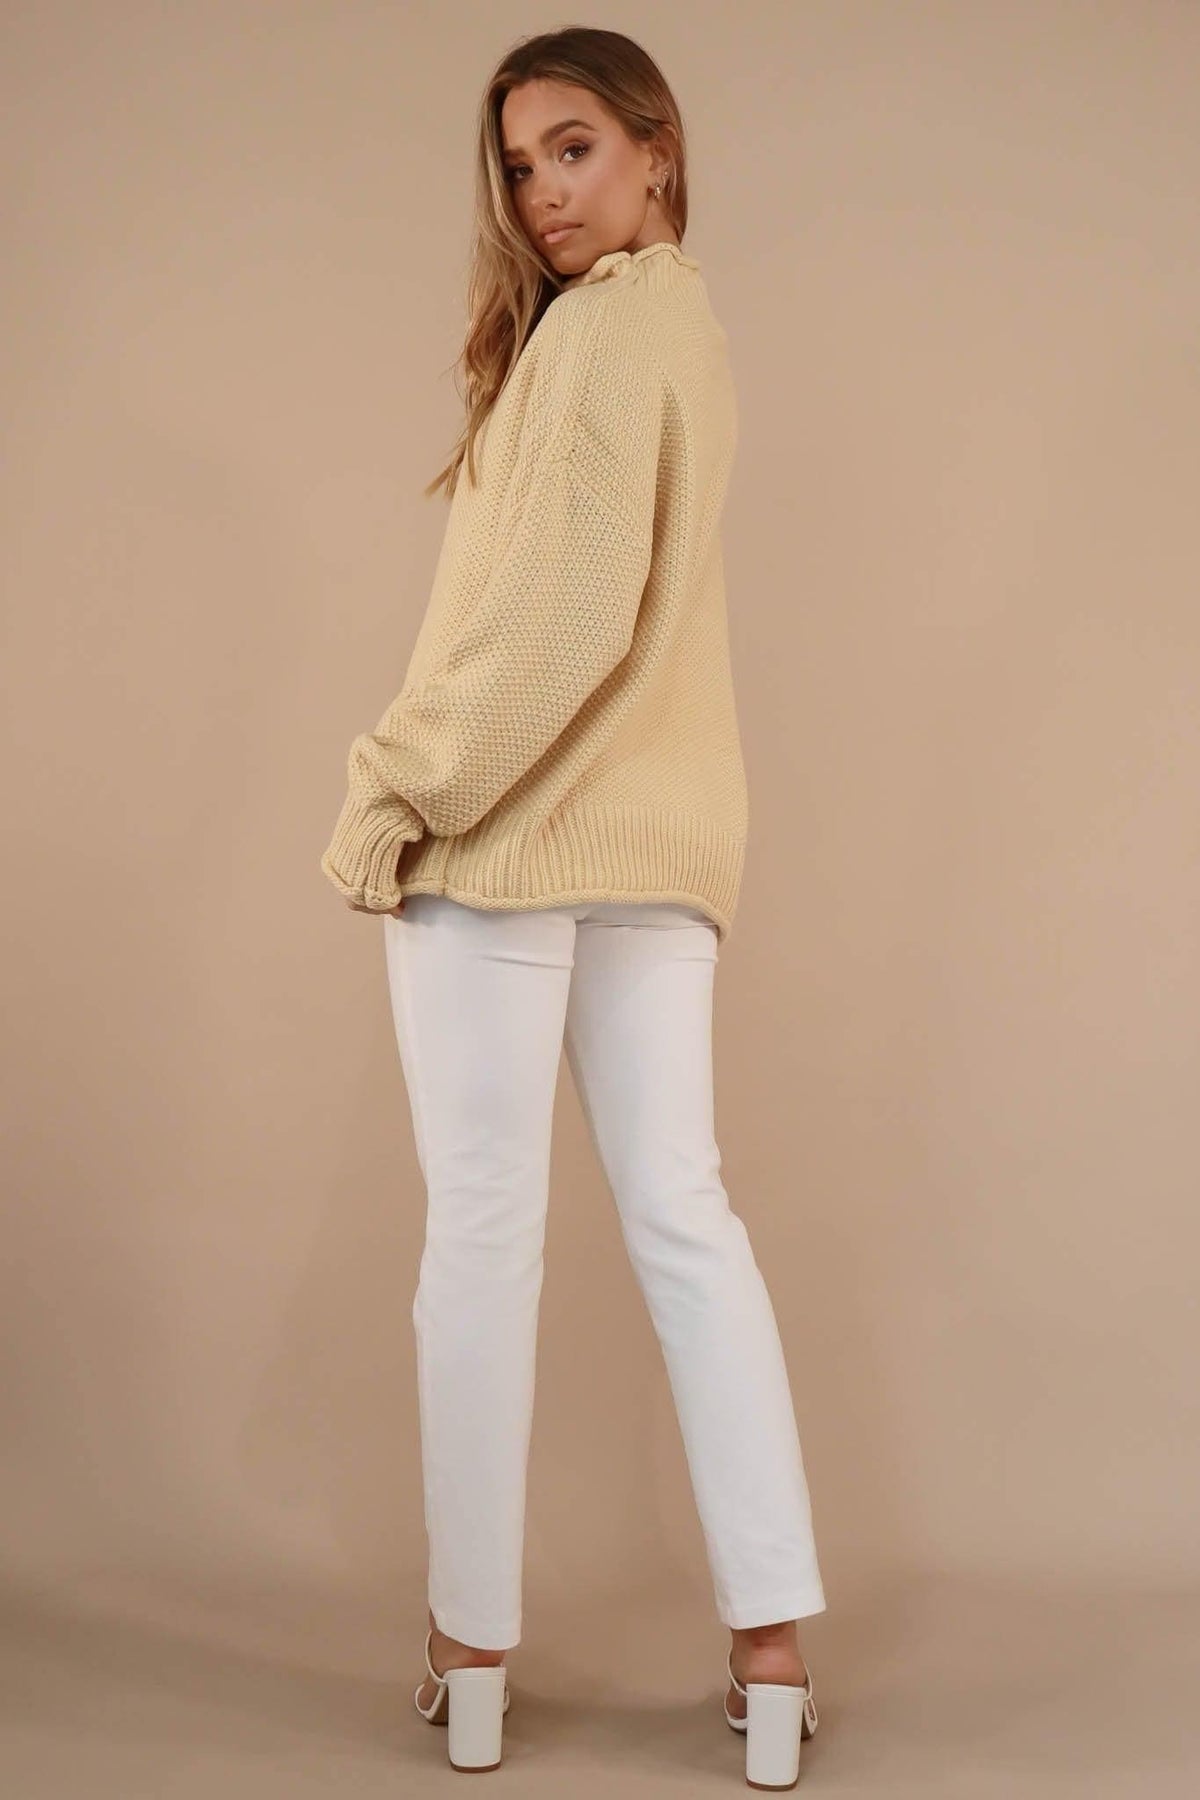 Sunnie Top, BEIGE, COTTON, KNIT, KNITS, LONG SLEEVE, POLYESTER, TOP, TOPS, , -MISHKAH